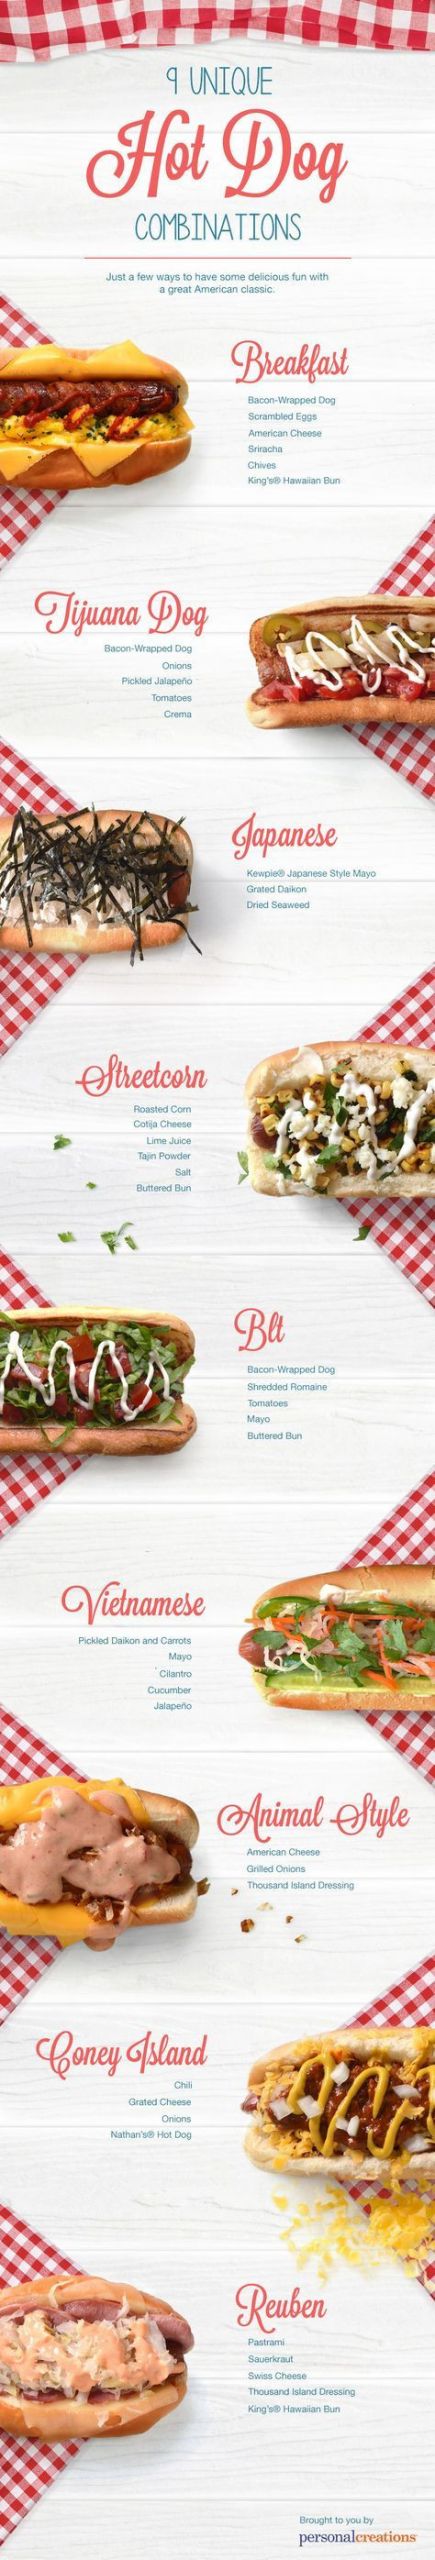 Fast Food Open On Labor Day
 9 Best Hot Dog Recipes for Labor Day [INFOGRAPHIC